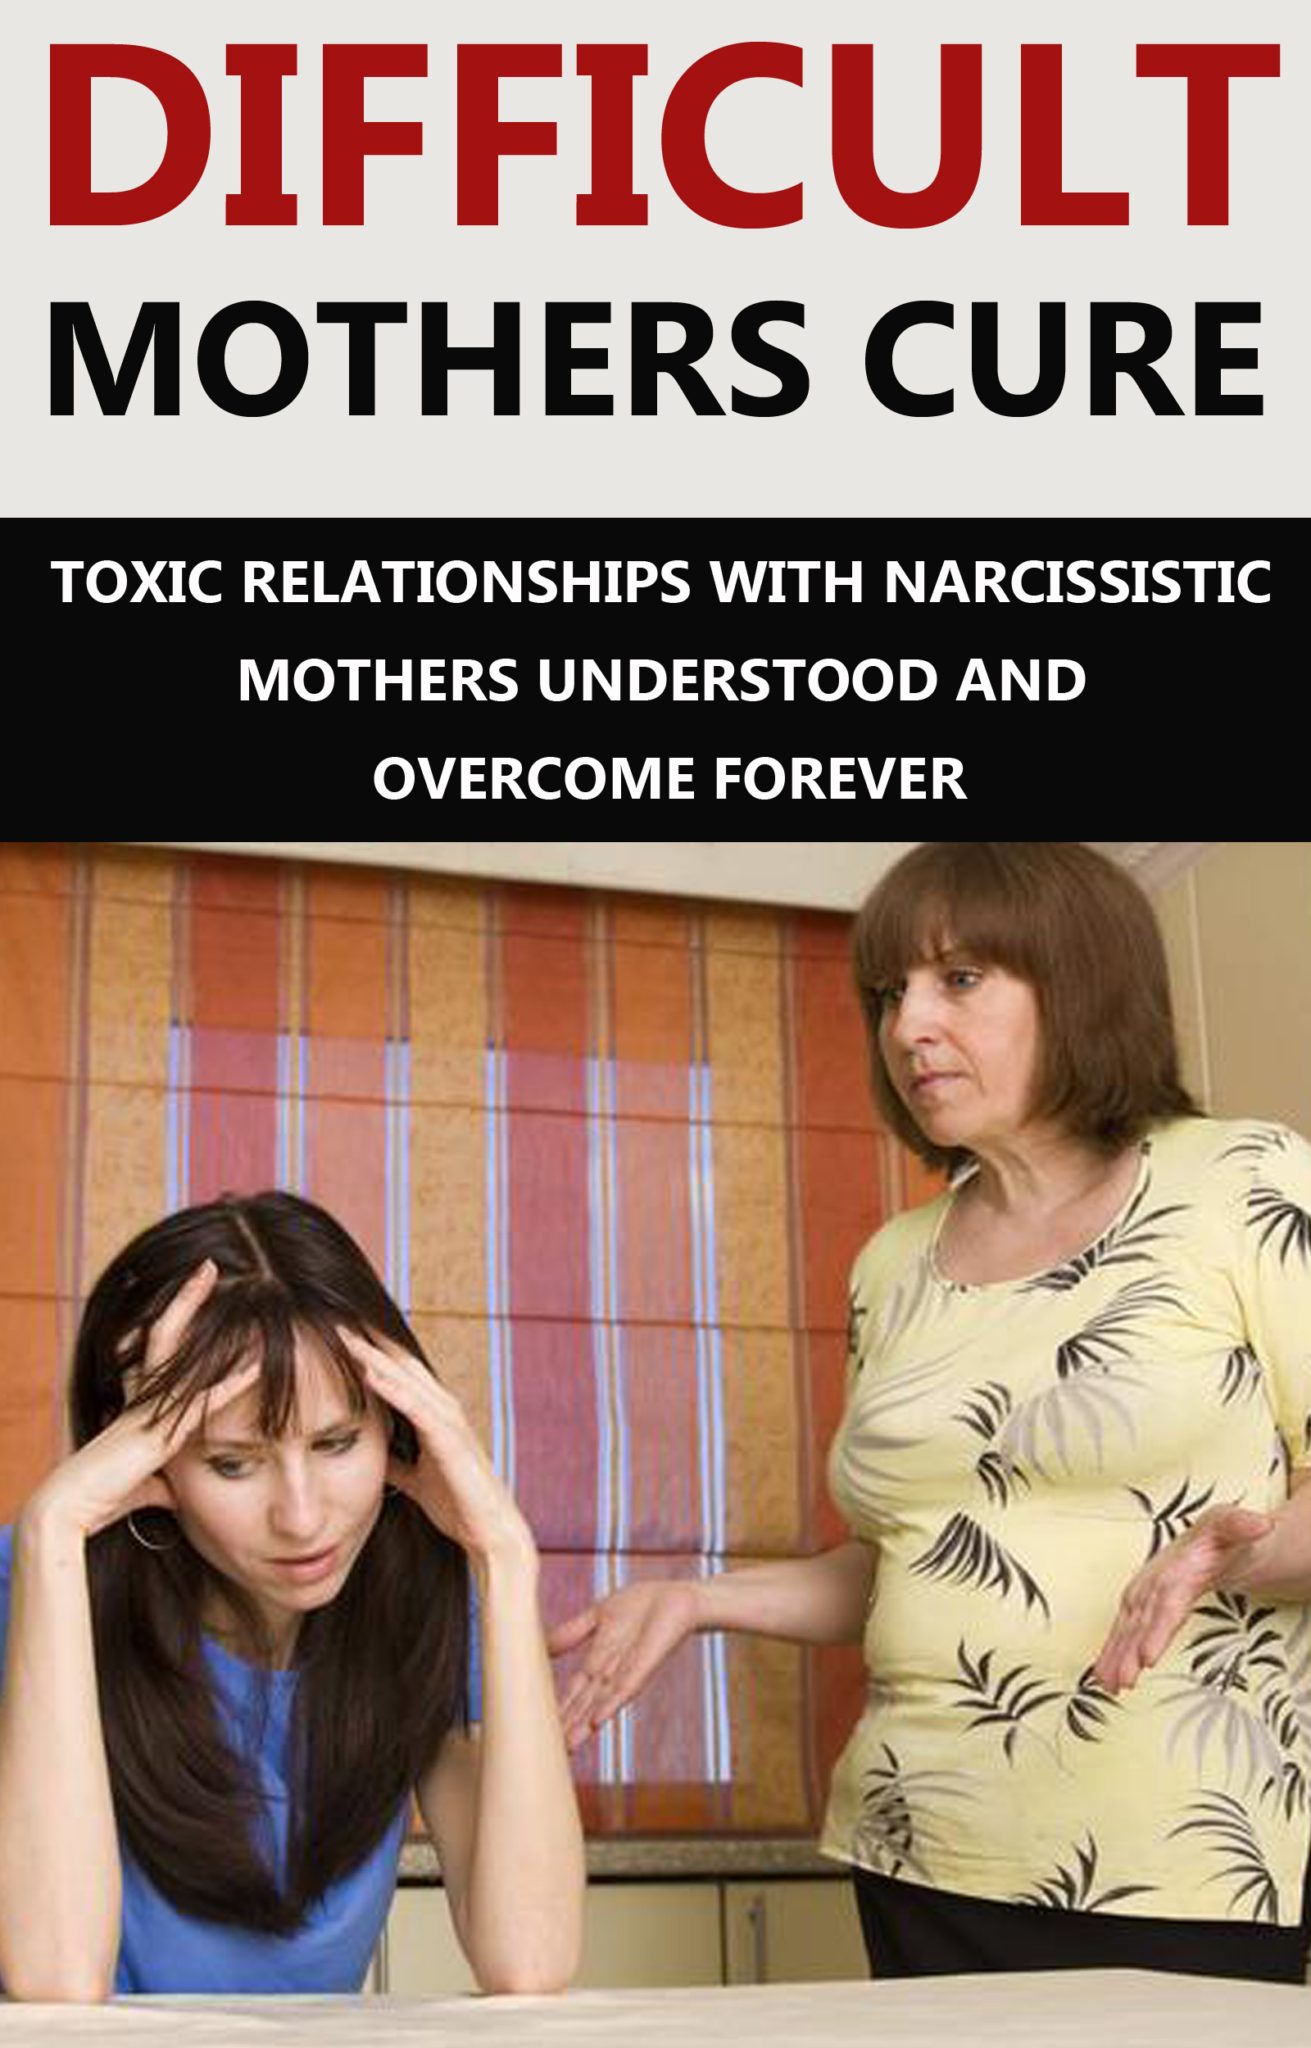 FREE: Difficult Mothers Cure: Toxic Relationships With Narcissistic Mothers Understood And Overcome Forever by John Market